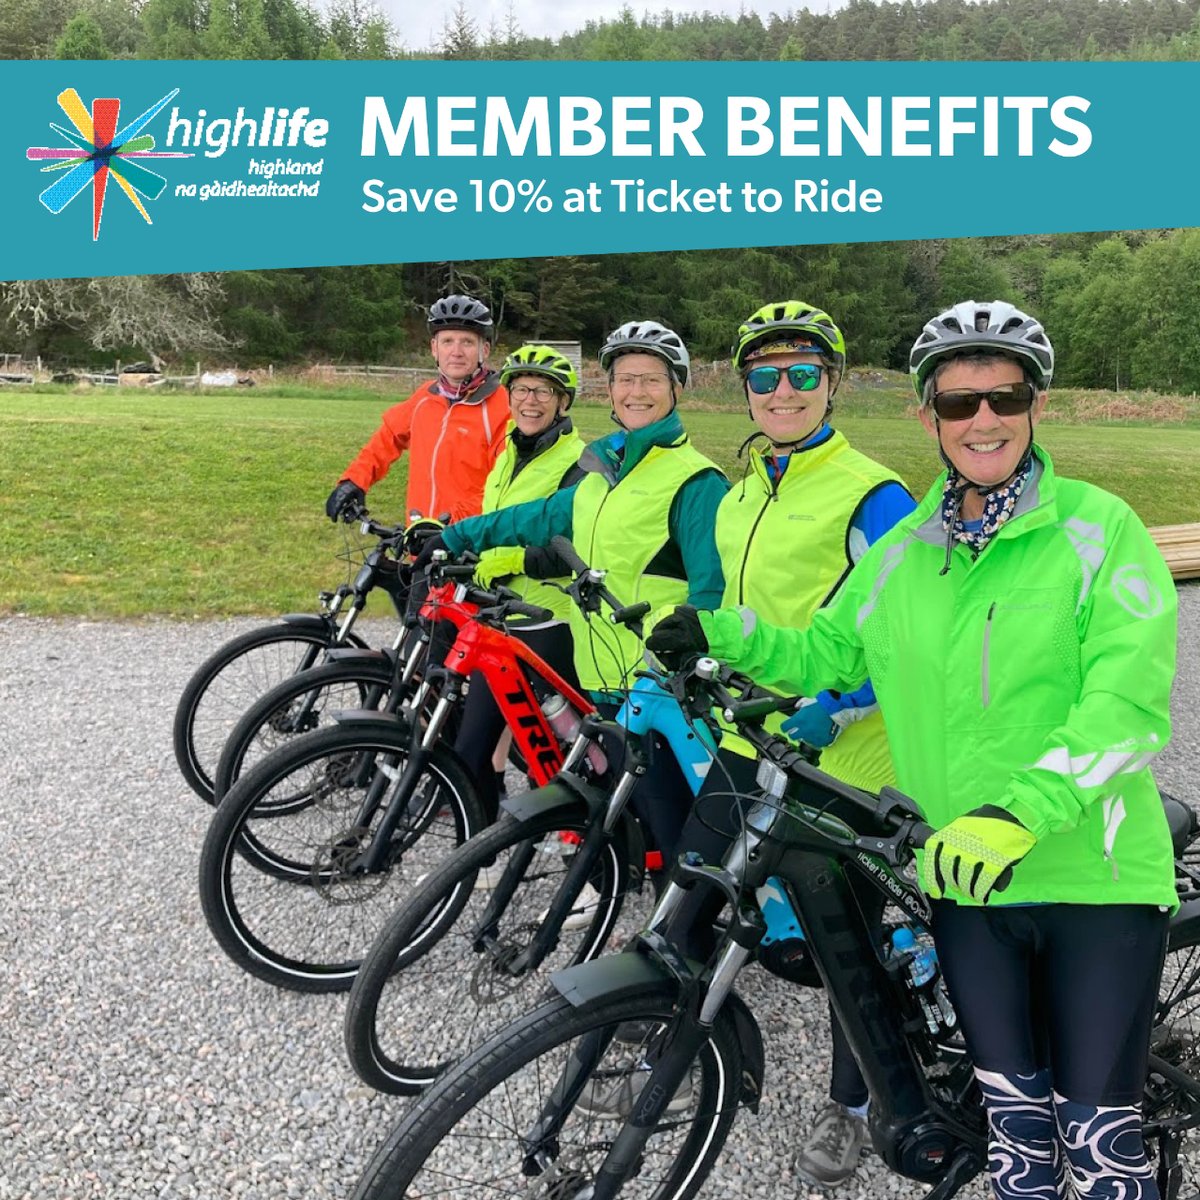 ⭐️ Member Benefits ⭐️  🚲 Save 10% at Ticket to Ride Discover more benefits with High Life Highland: hlh.scot/4466yTB #MemberBenefits #MakingLifeBetter